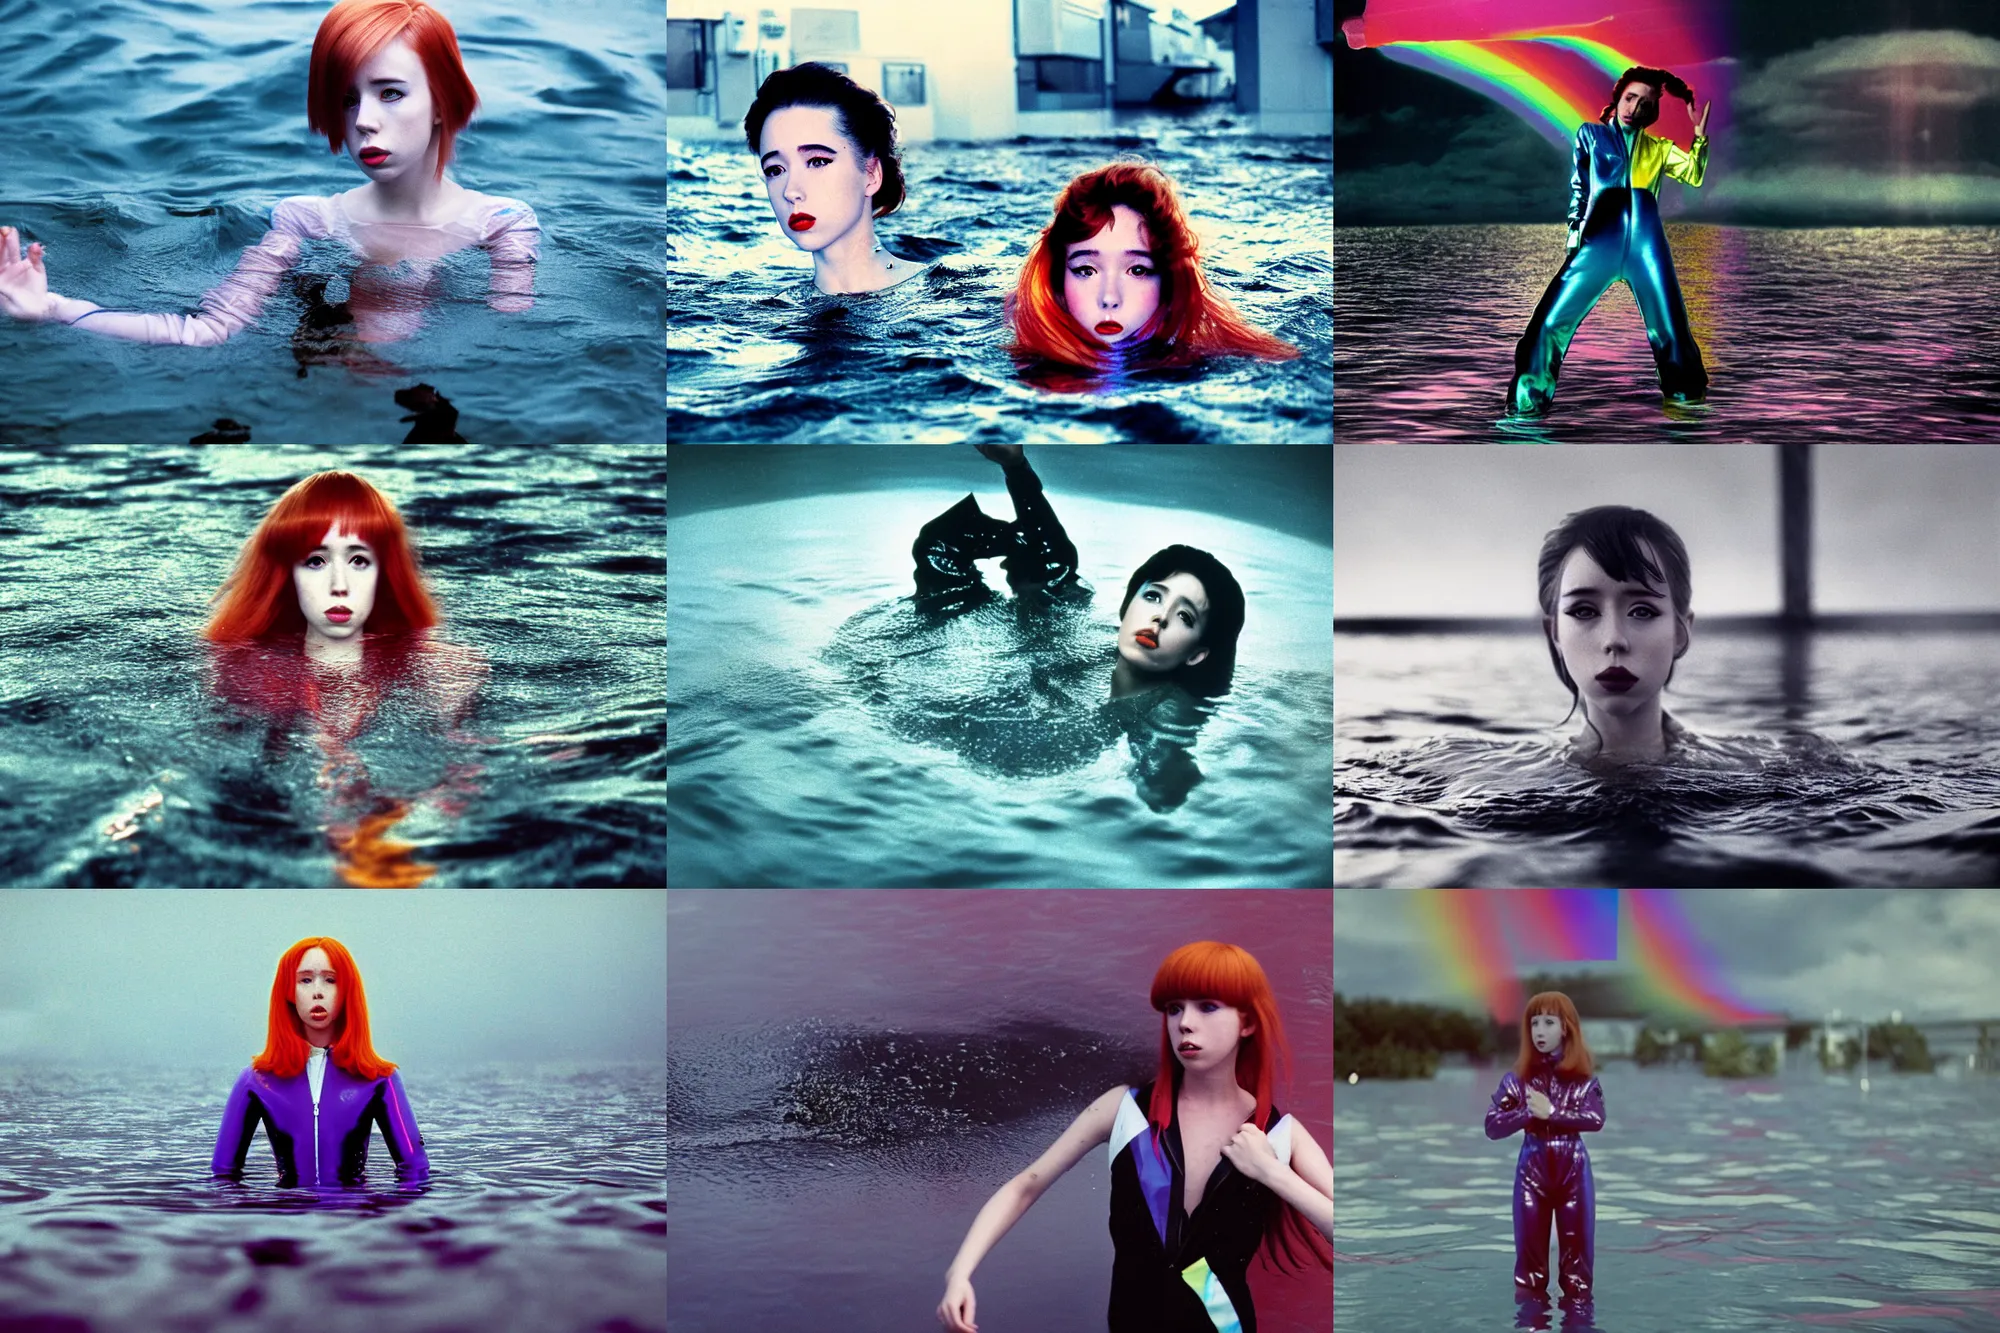 Prompt: Beautiful Holly Herndon style cottagecore seinen manga Fashion photography portrait tokyo top gun(1980) movie still from underwater space dance scene of model, wearing refracting rainbow diffusion wet plastic Balenciaga designed specular highlights anti-g flight jump suit, half submerged in heavy nighttime floods, water to waist, , épaule devant pose;pursed lips;athletic; pixie hair,eye contact, ultra realistic, Panavision Panaflex X , Technicolor, 8K, 35mm lens, three point perspective, tilt shift mirror kaleidoscope orbs background, extreme closeup portrait, chiaroscuro, highly detailed, by moma, by Nabbteeri by Sergey Piskunov